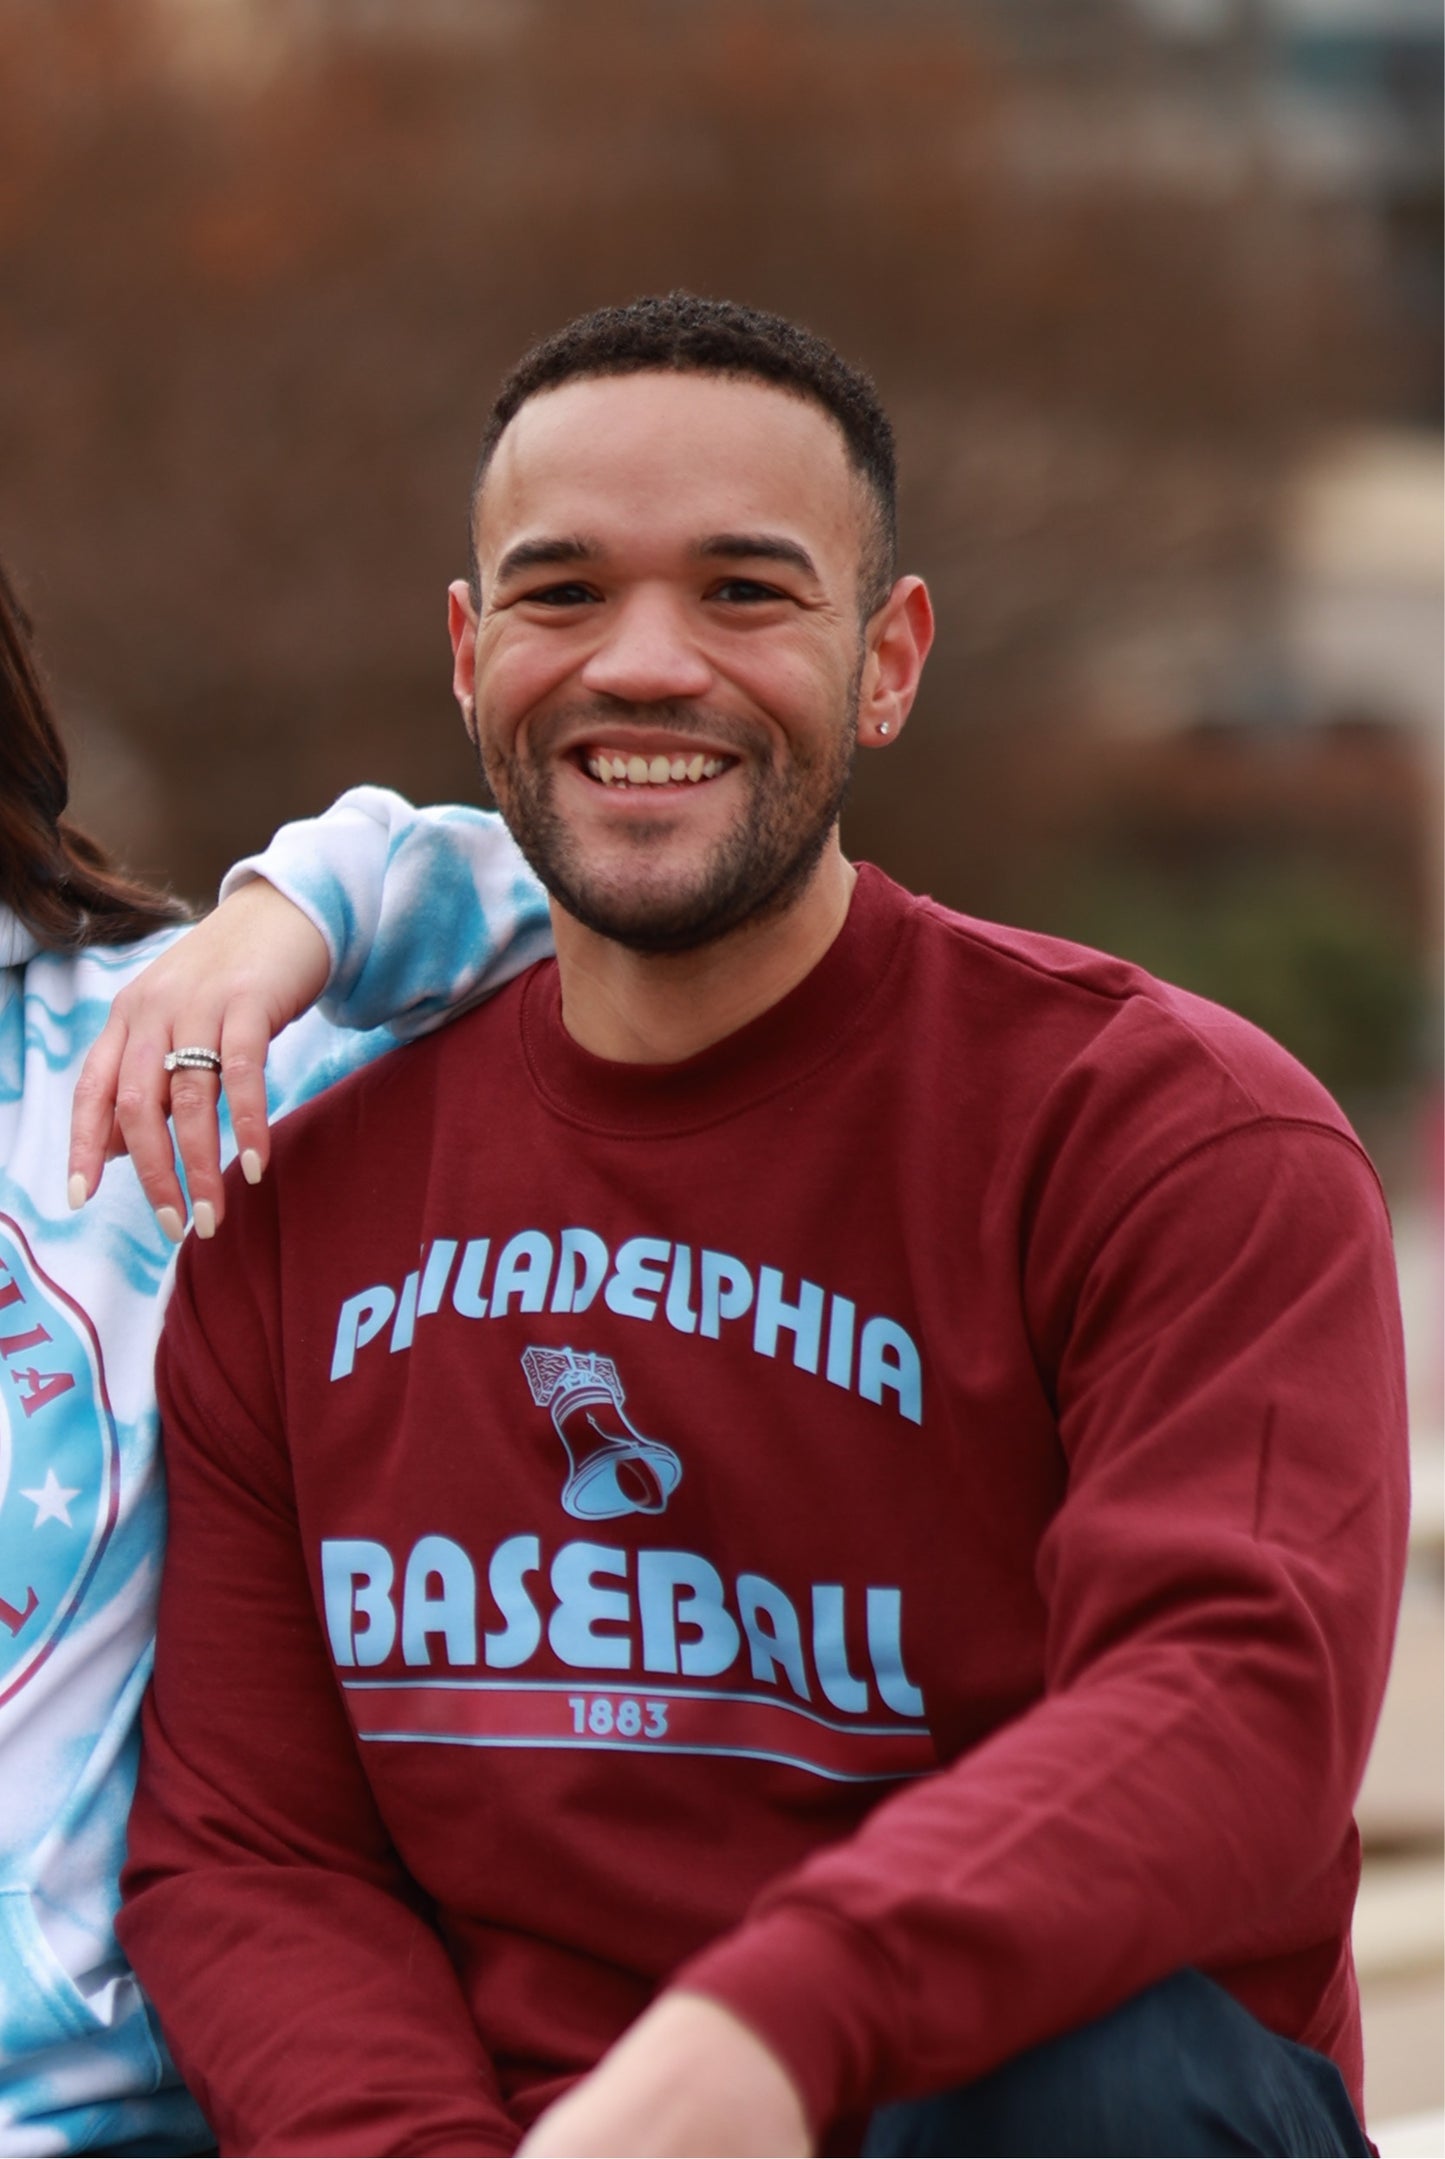 Philly Arched Baseball sweatshirt